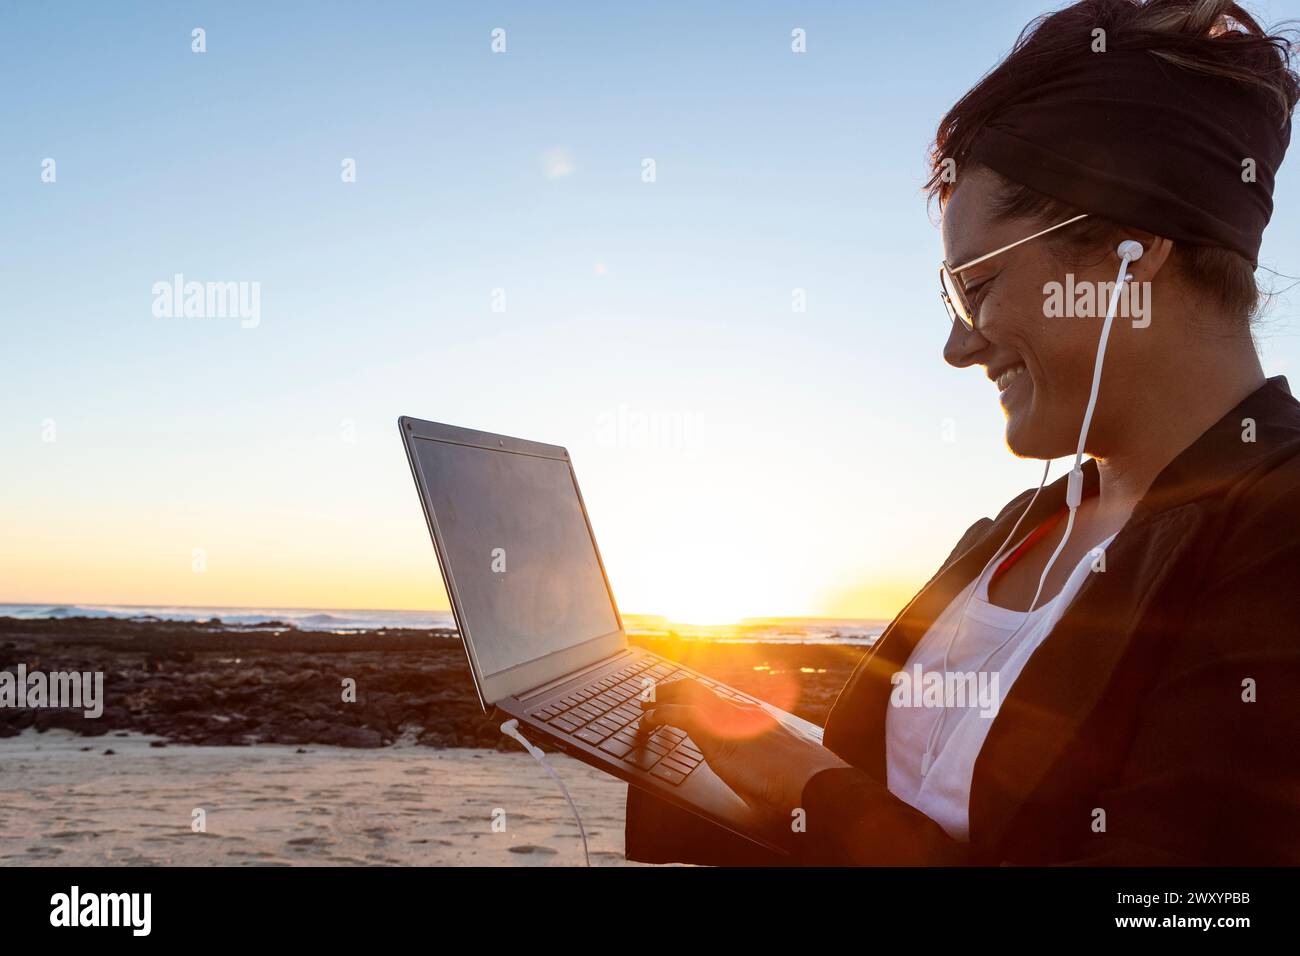 Side view of smiling woman works on her laptop on a beach at sunset, embodying the digital nomad lifestyle with headphones on and the glow of the sett Stock Photo